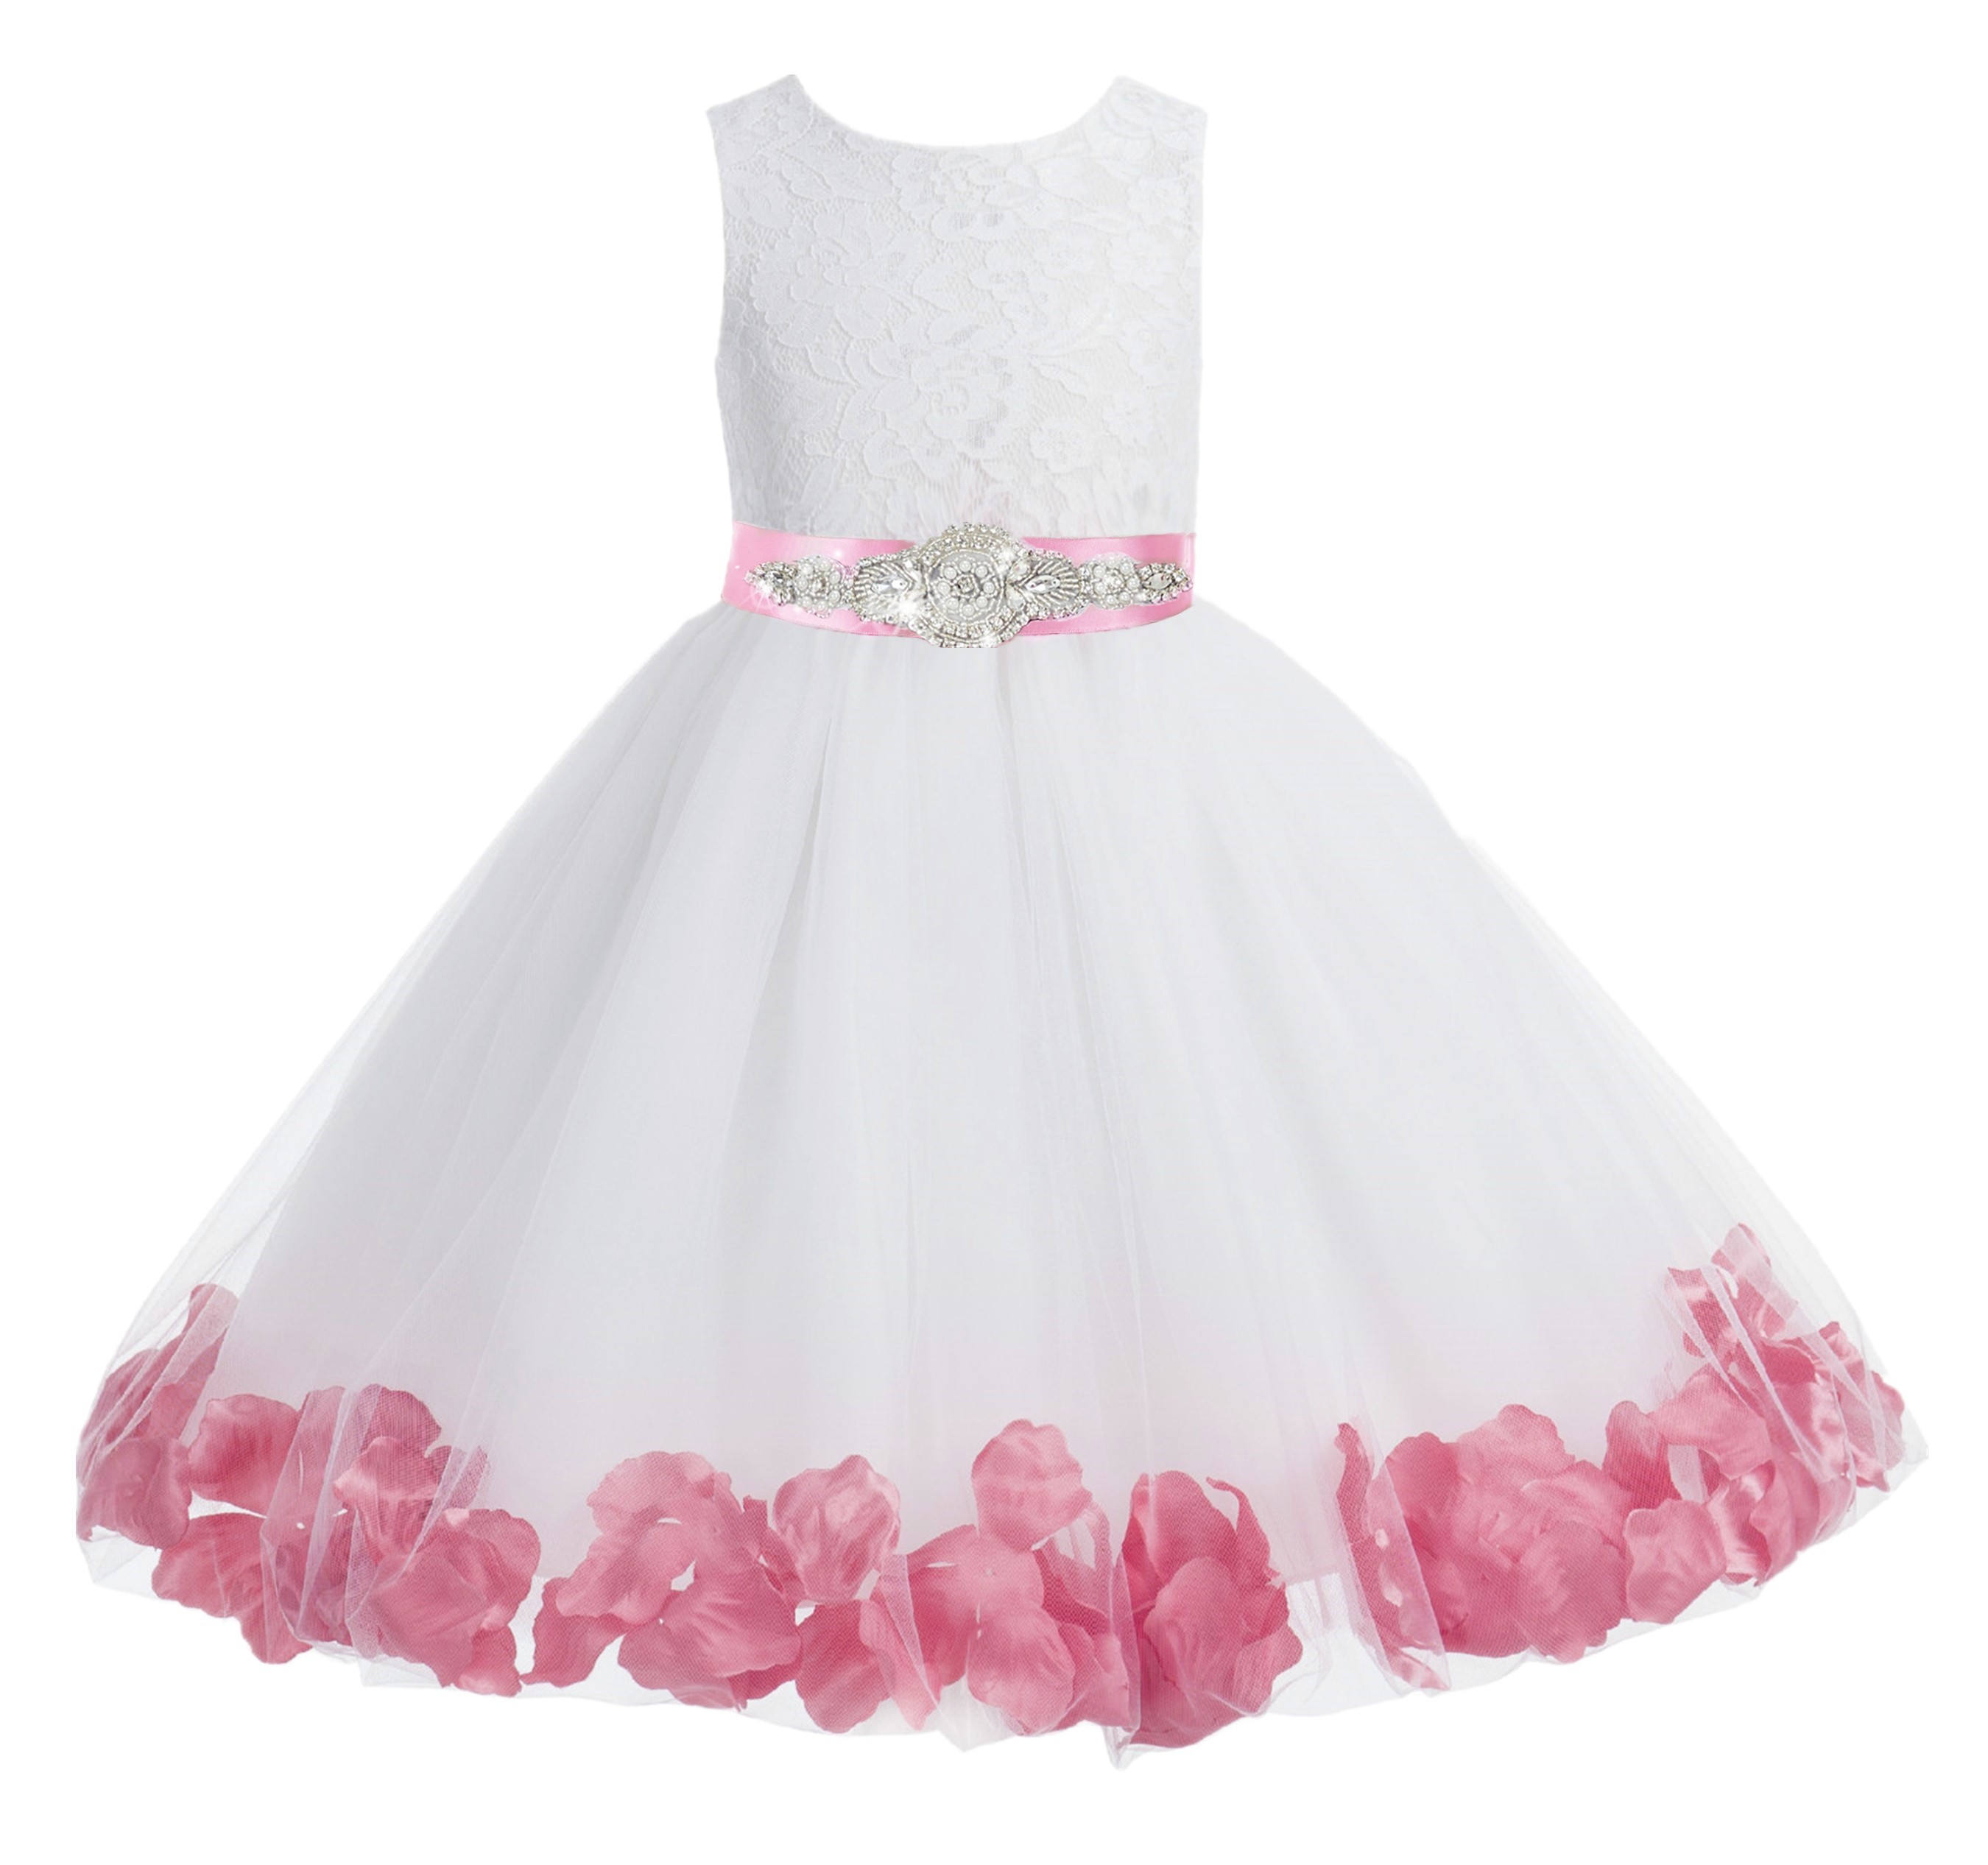 White / Dusty Rose Floral Lace Heart Cutout Flower Girl Dress with Petals 185